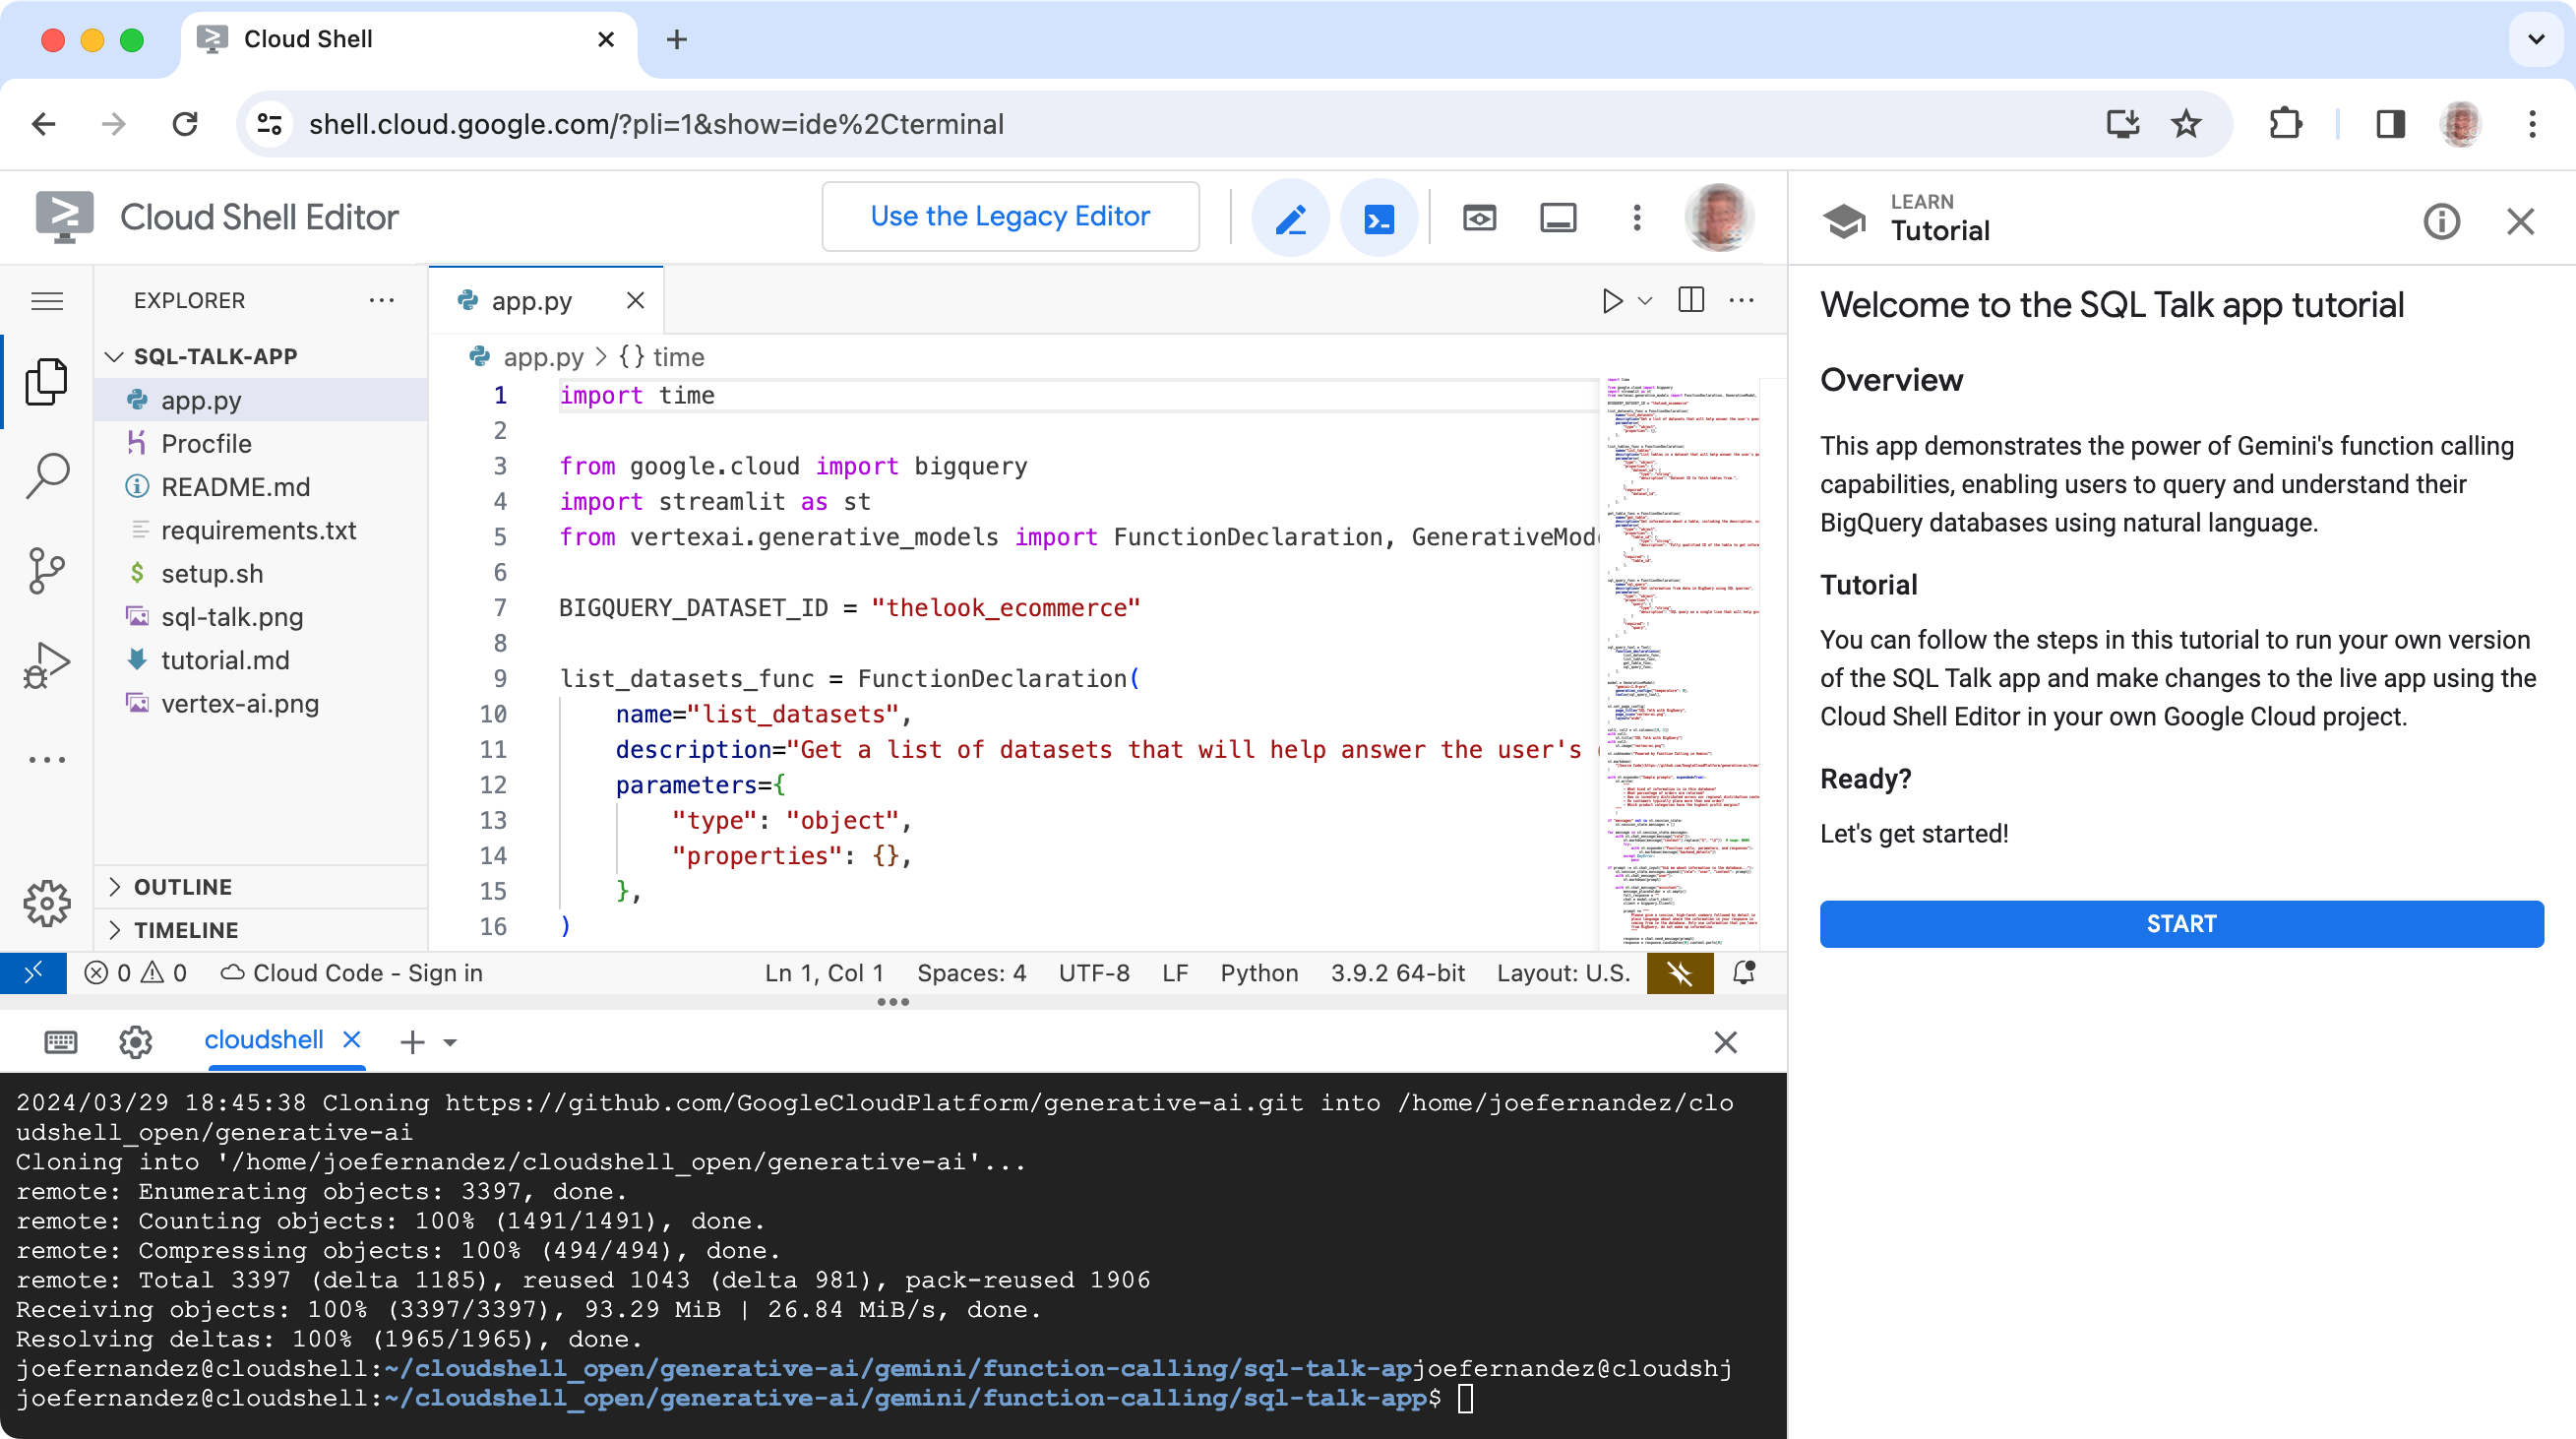 Google Cloud Shell Editor with the SQL Talk project code shown